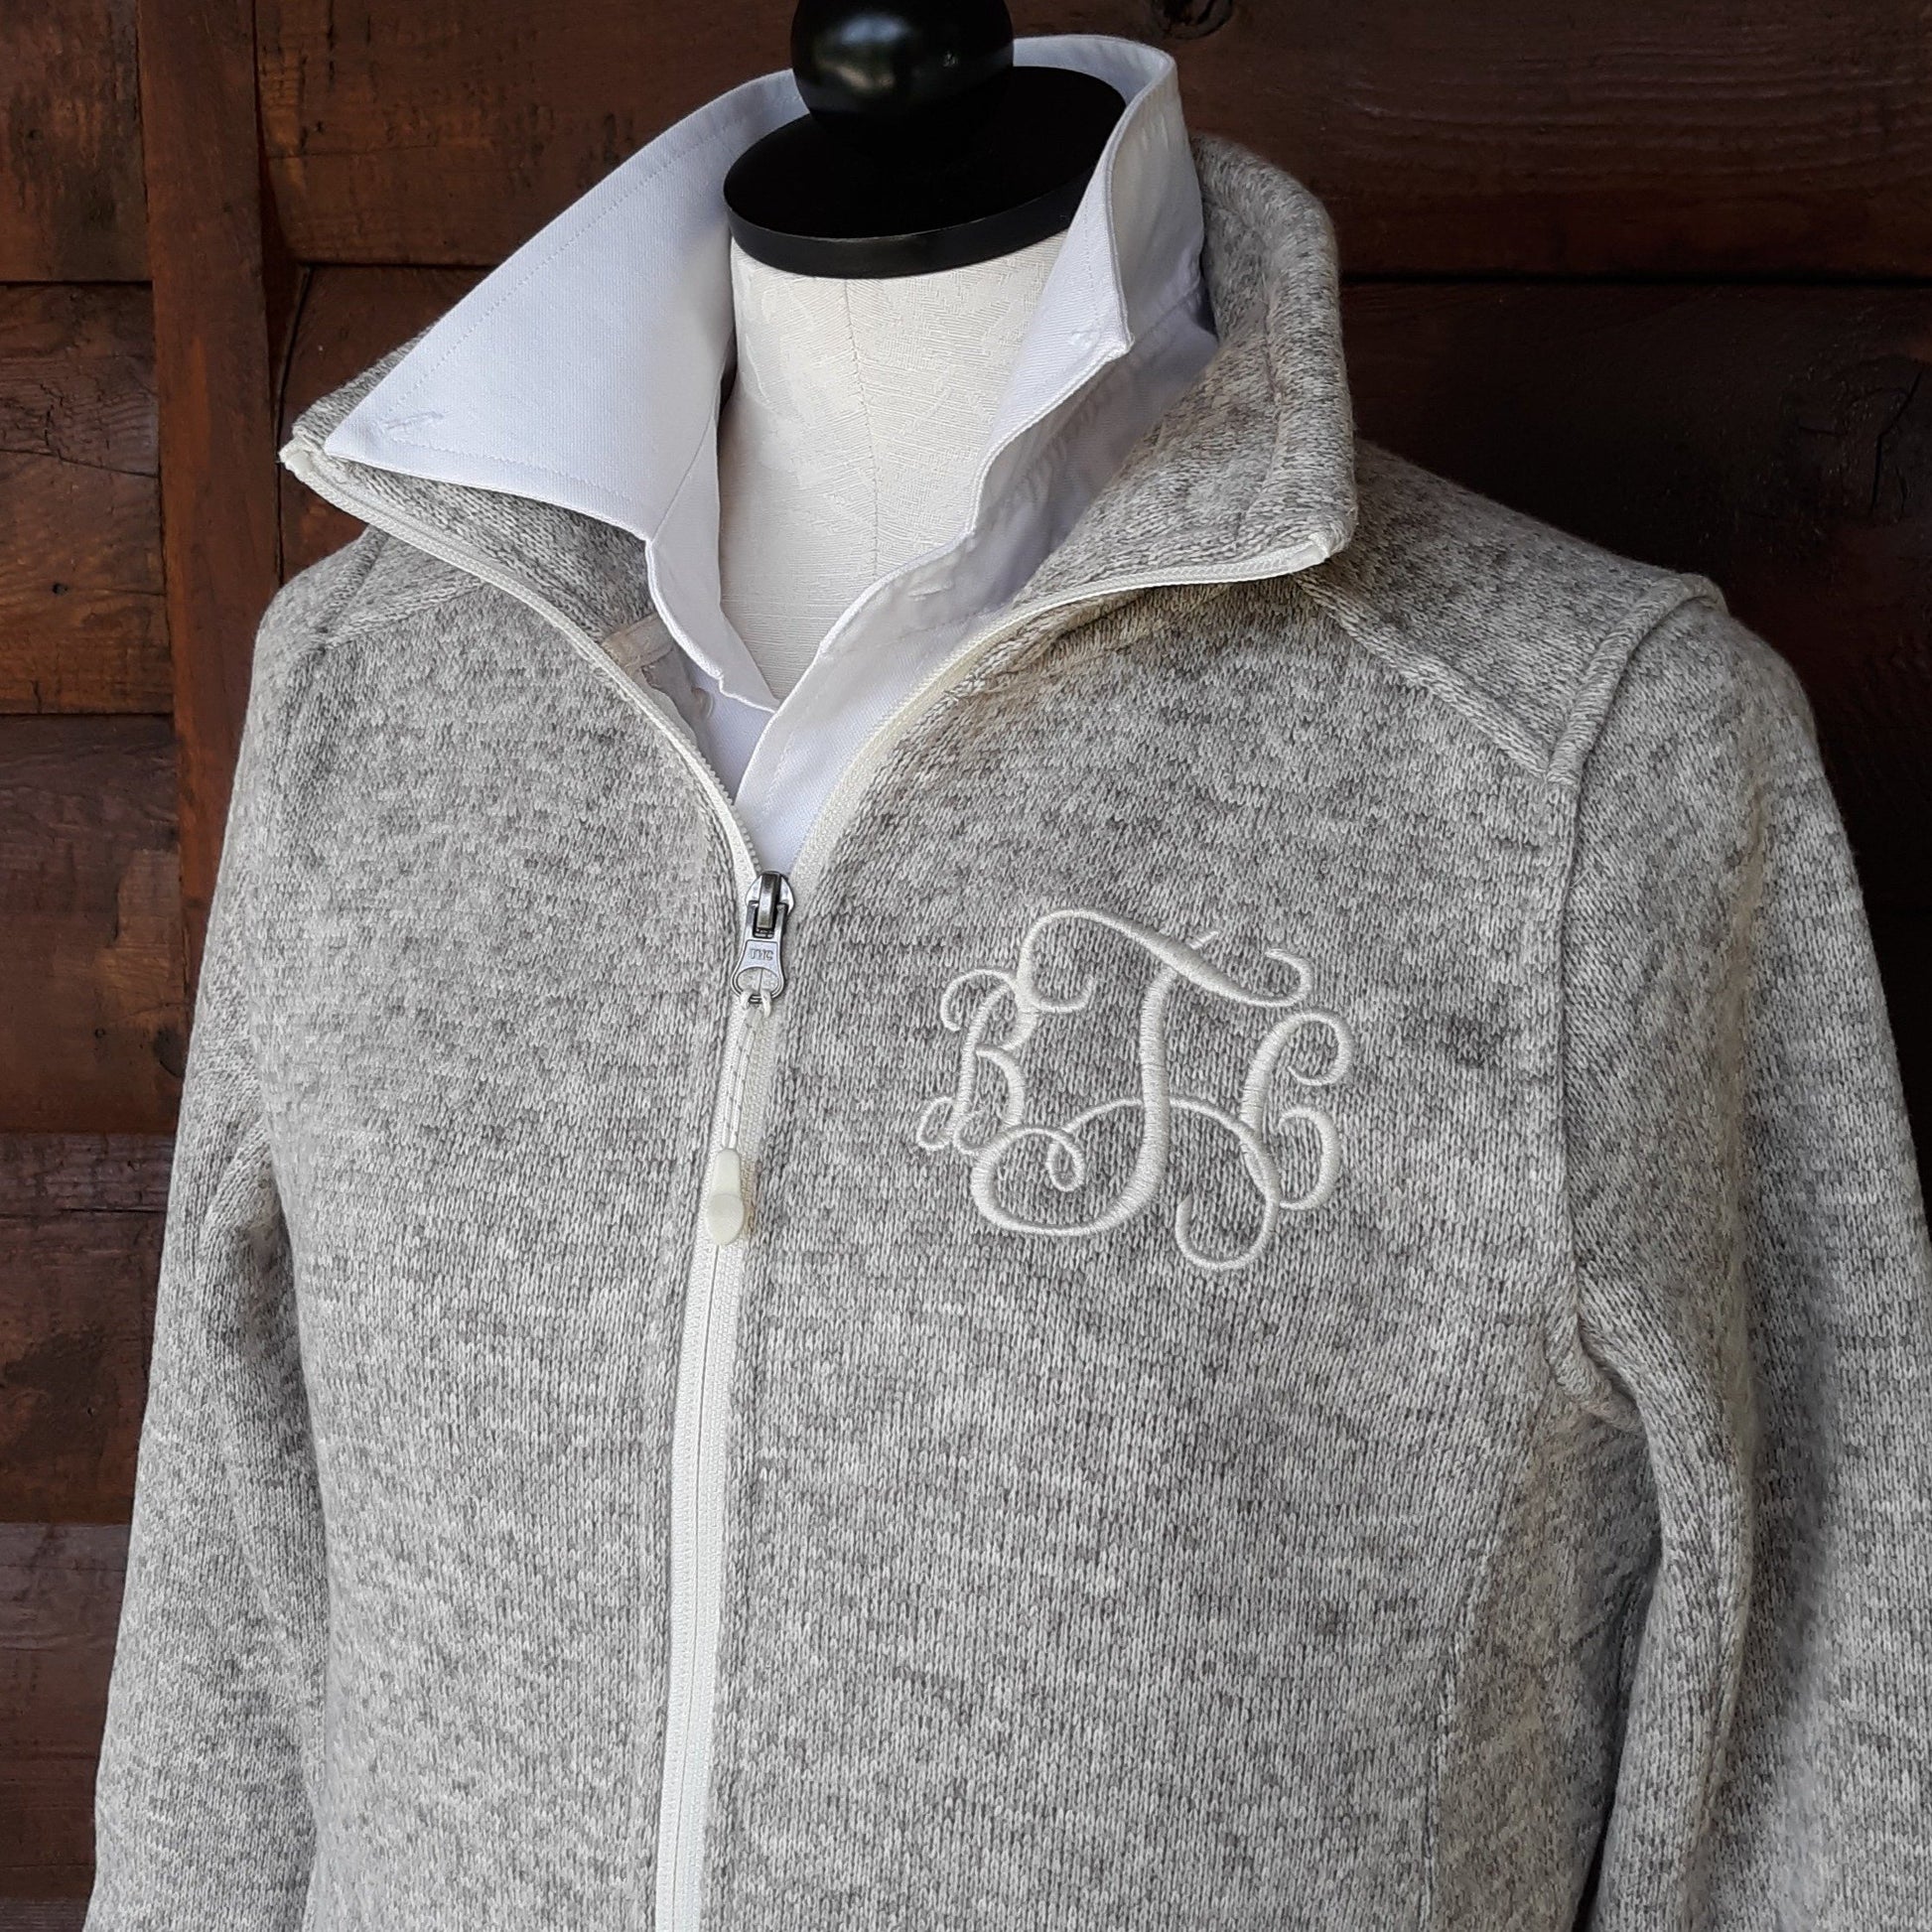 Charles River Apparel Heathered Fleece Sweater Jacket better with a monogram